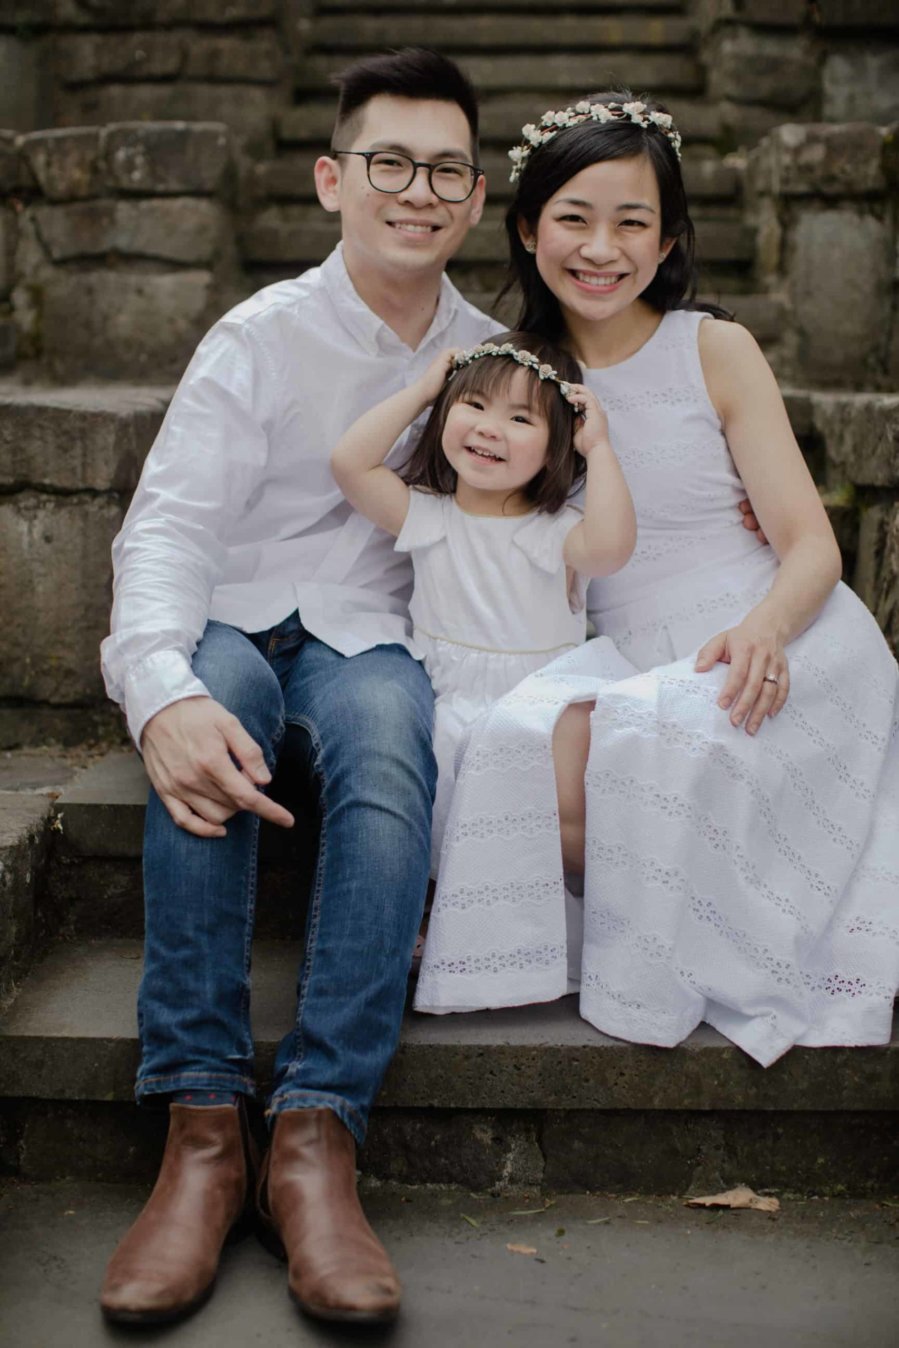 Happy Family Portrait Session With fun relax casual cozy lifestyle playful at the green park